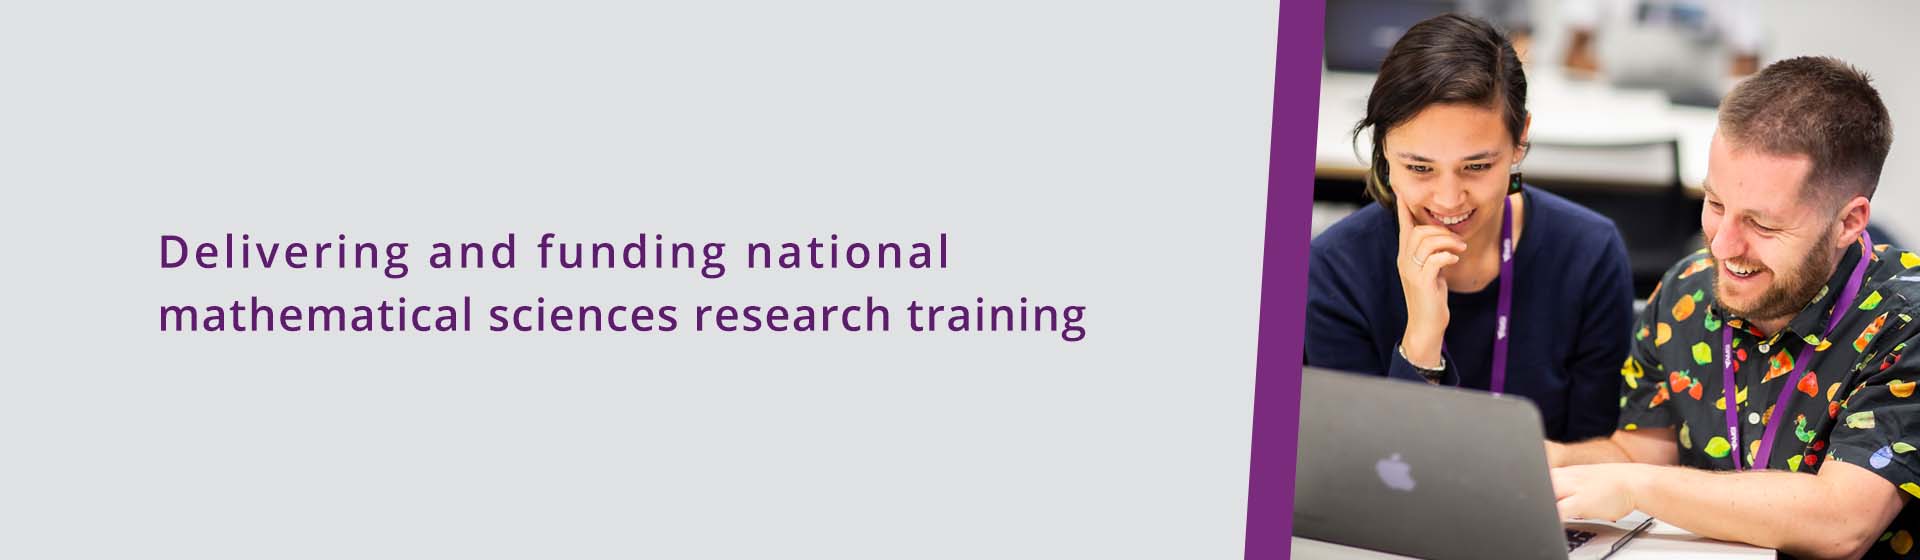 Delivering and funding national mathematical sciences research training